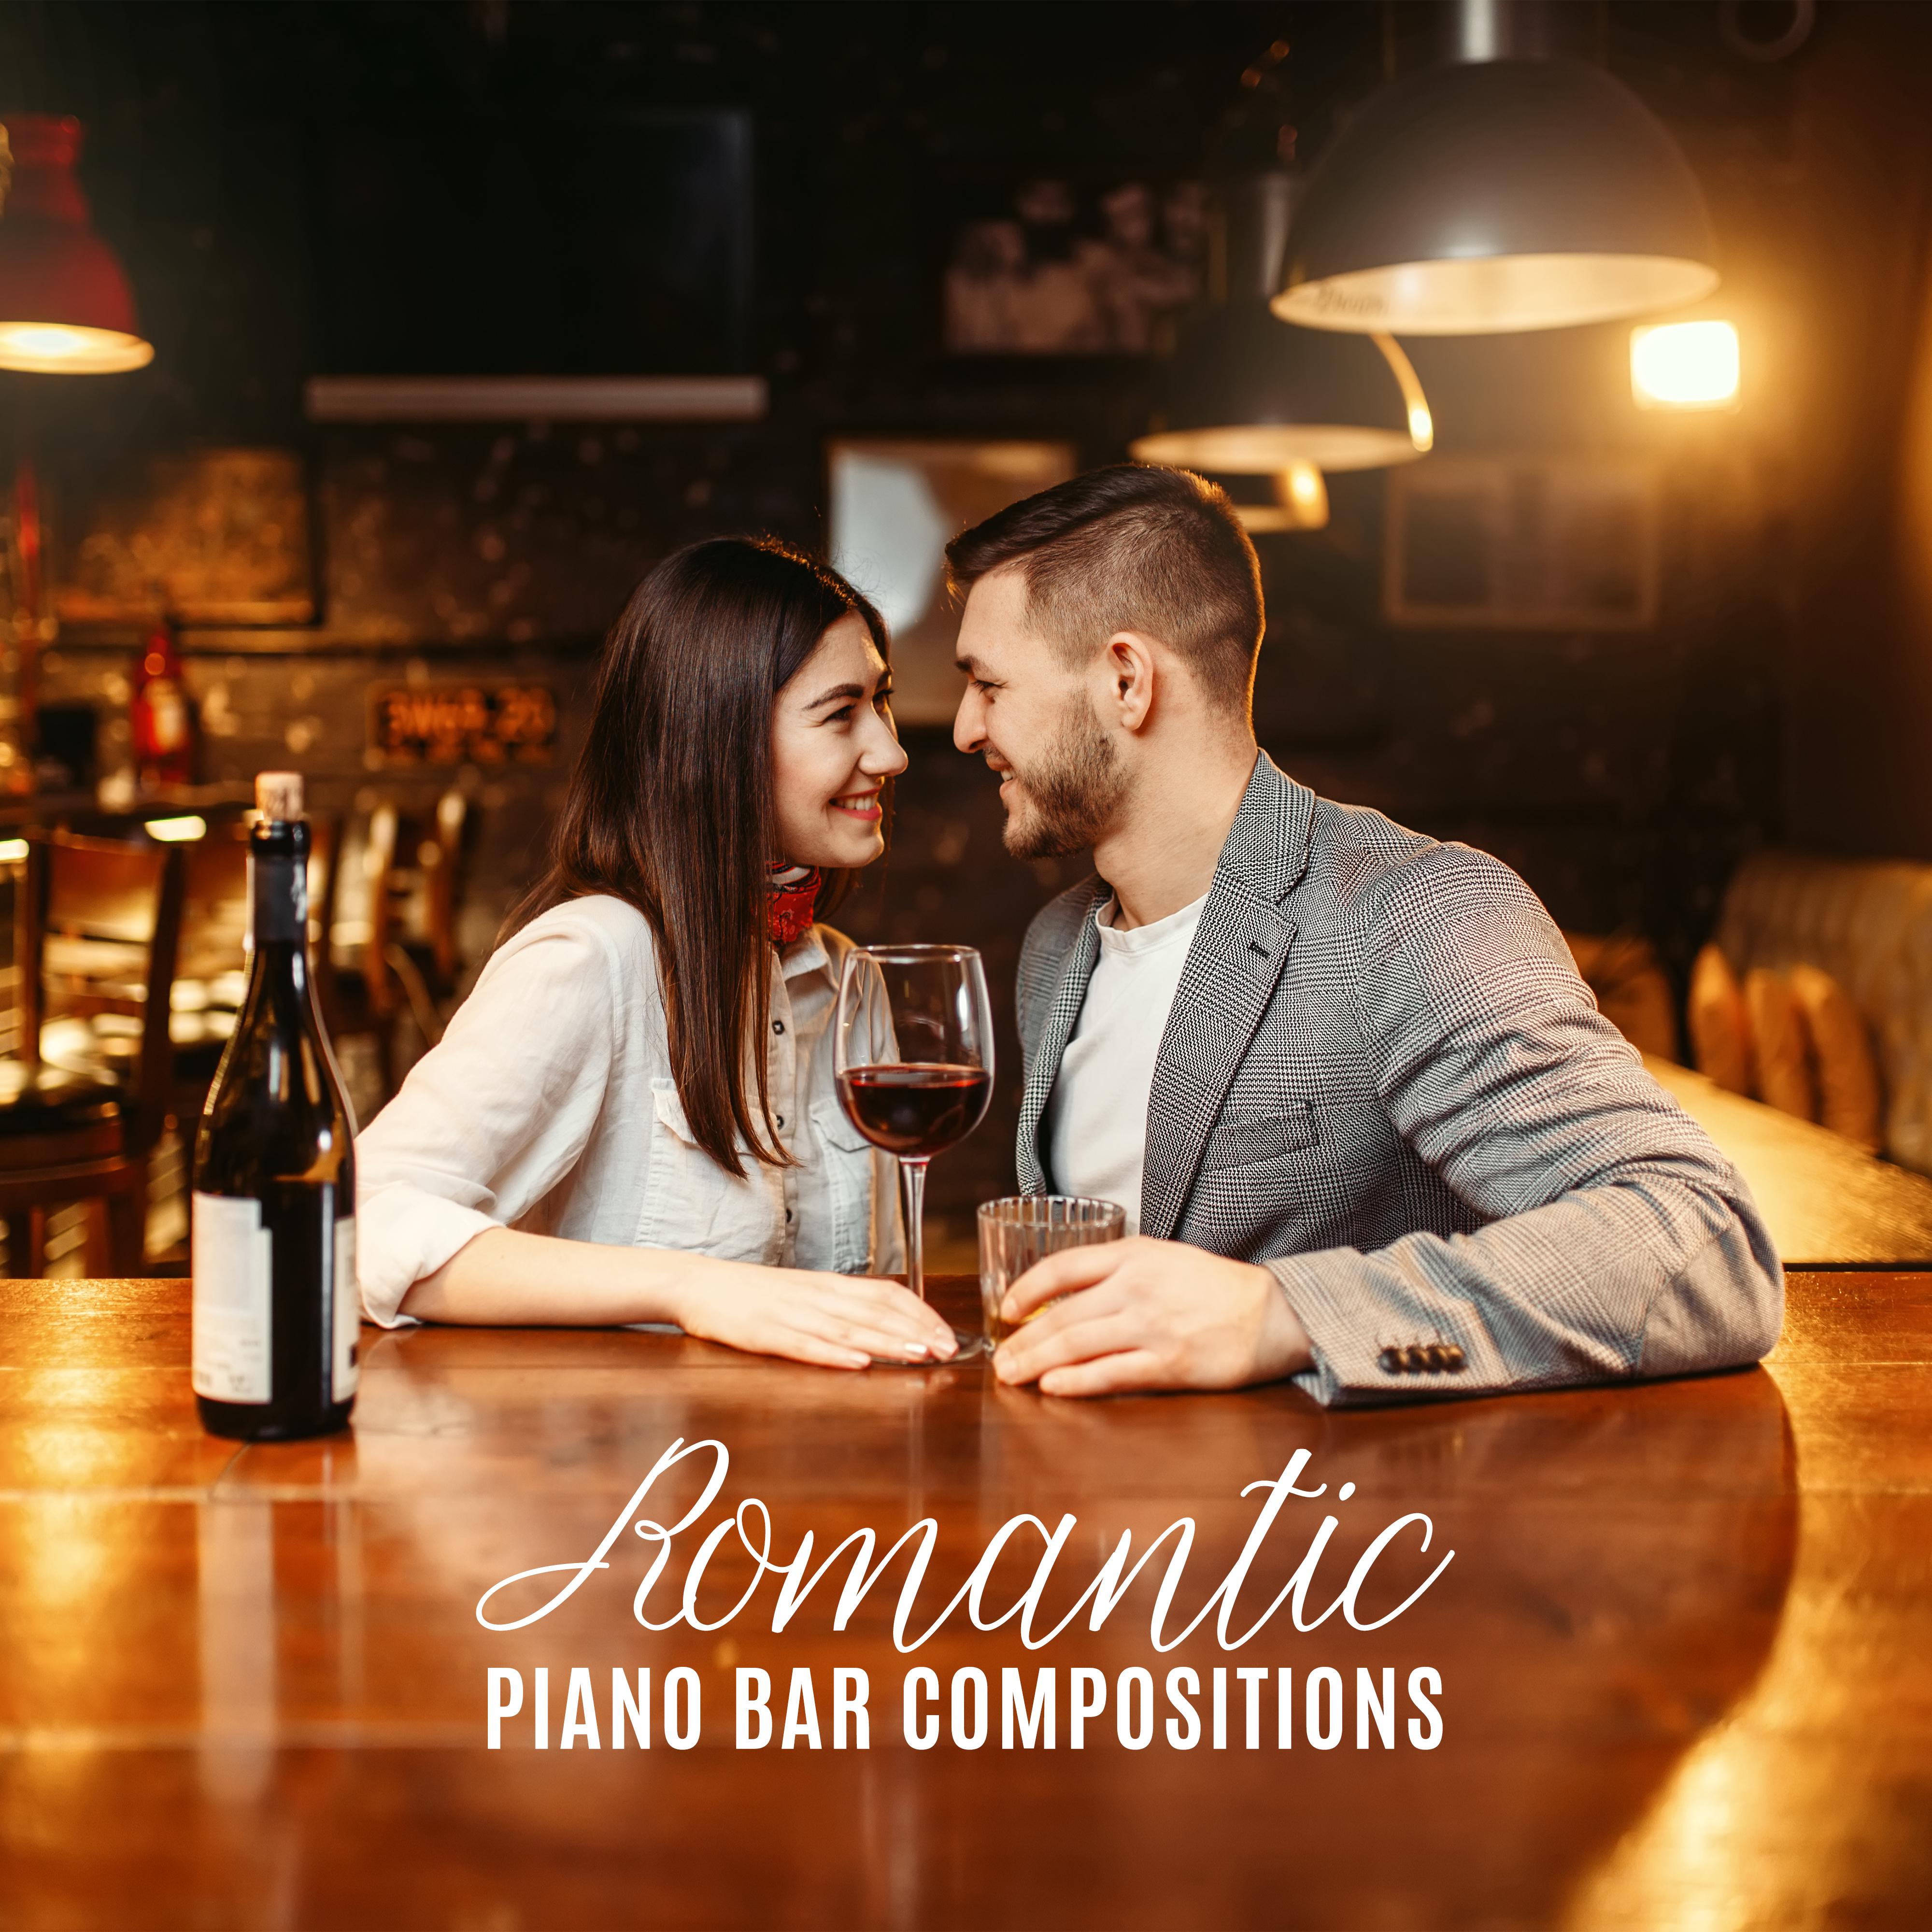 Romantic Piano Bar Compositions – 15 Tracks from the Cocktail Lounges, Bars, Hotel Lobbies and Restaurants